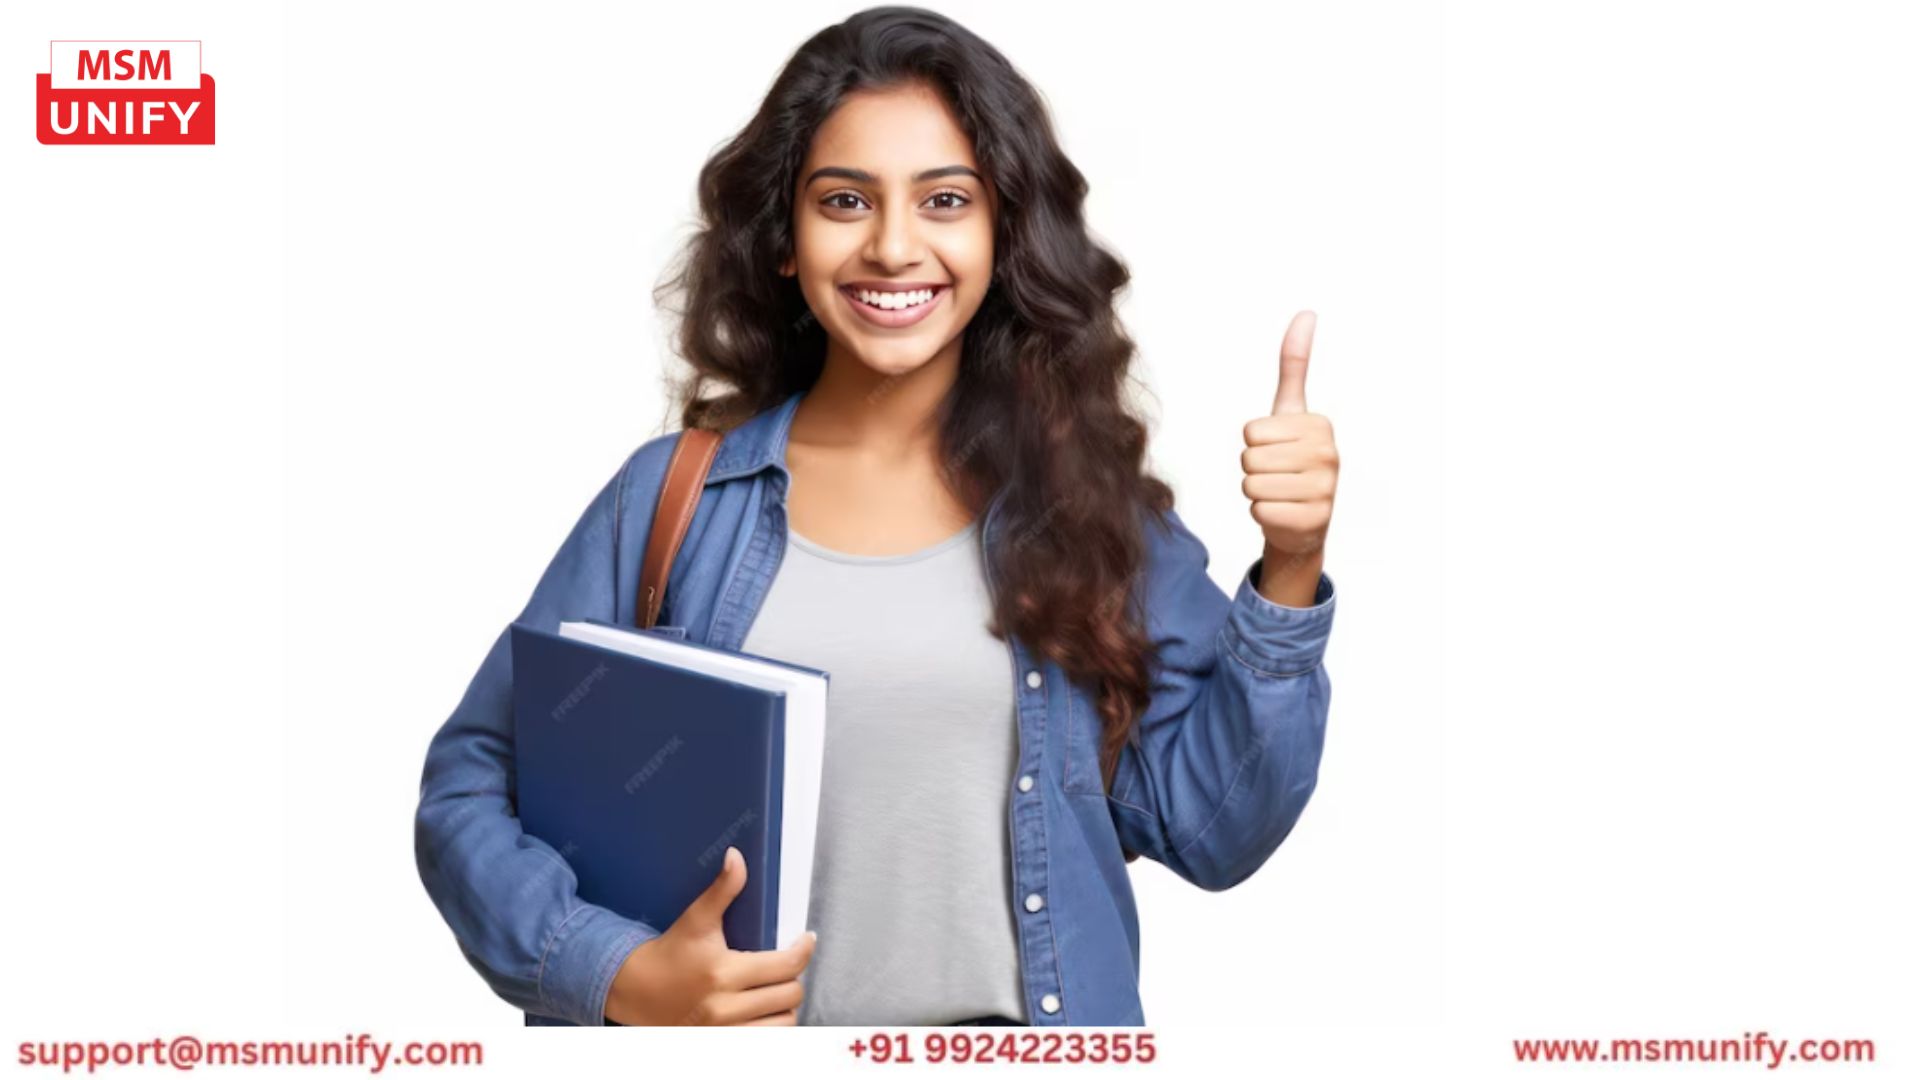 
Discover a stress-free admissions process tailored for <a href="https://www.msmunify.com/study-in-canada/">study in canada for Indian students</a>. Our comprehensive guide ensures a smooth transition, from application to enrollment. Unlock your academic dreams today!



